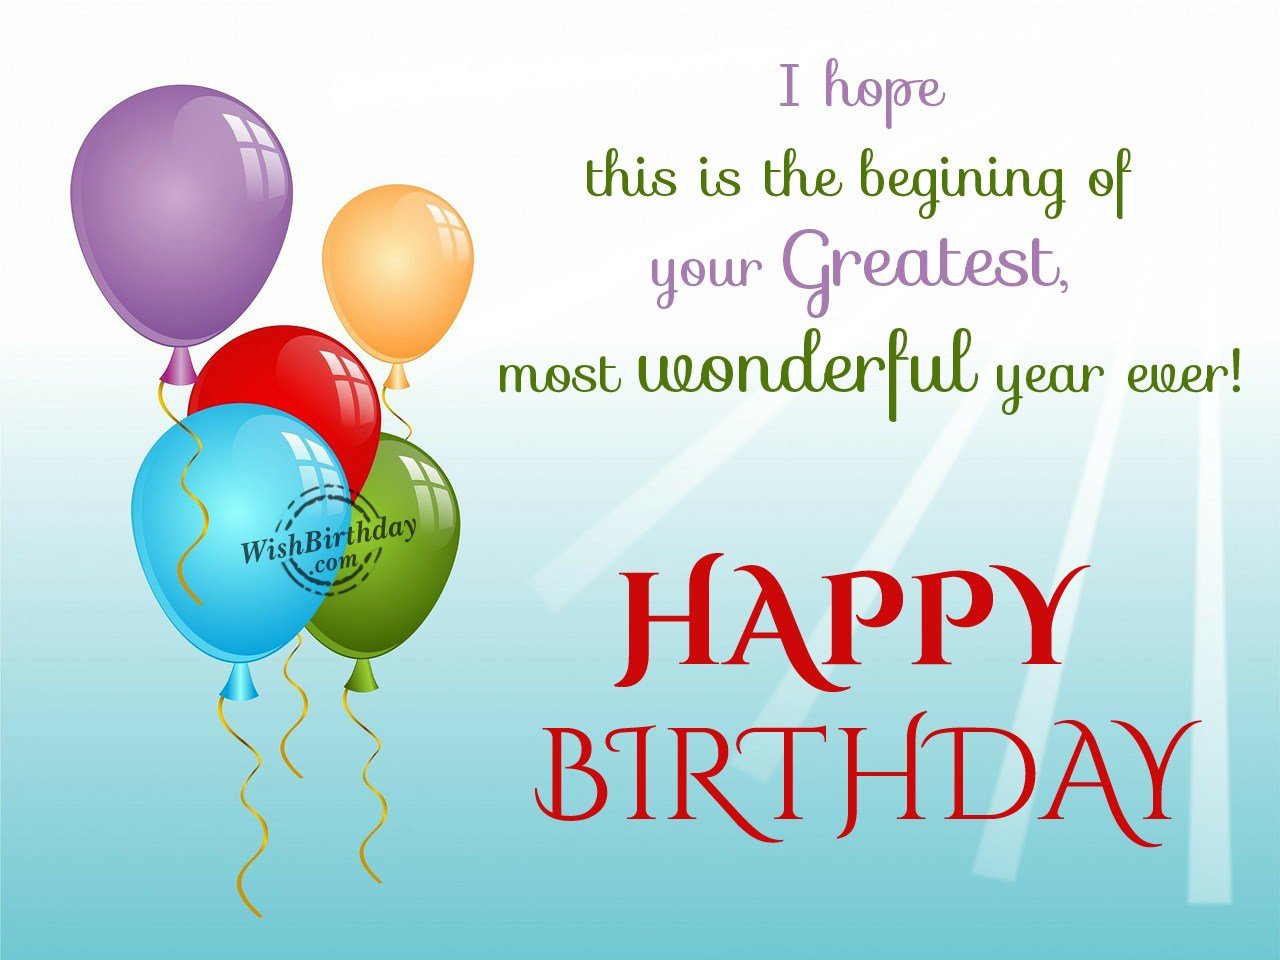 Birthday Wishes With Blessings - Birthday Images, Pictures